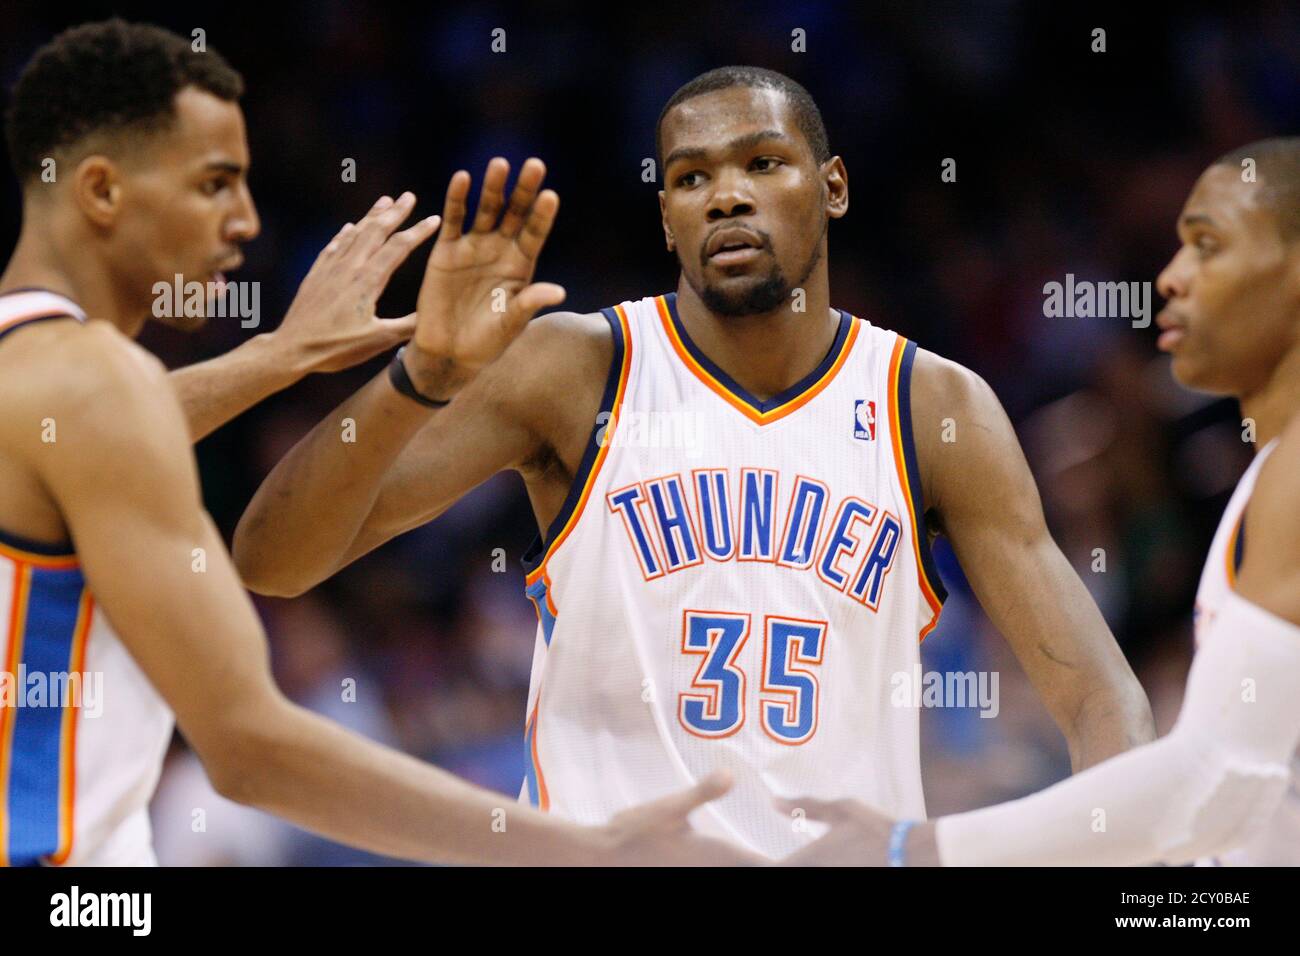 Oklahoma City Thunder forward Kevin Durant (C) celebrates a win over the Boston  Celtics with teammates Thabo Sefolosha of Switzerland (L) and Russell  Westbrook (R) after their NBA basketball game in Oklahoma